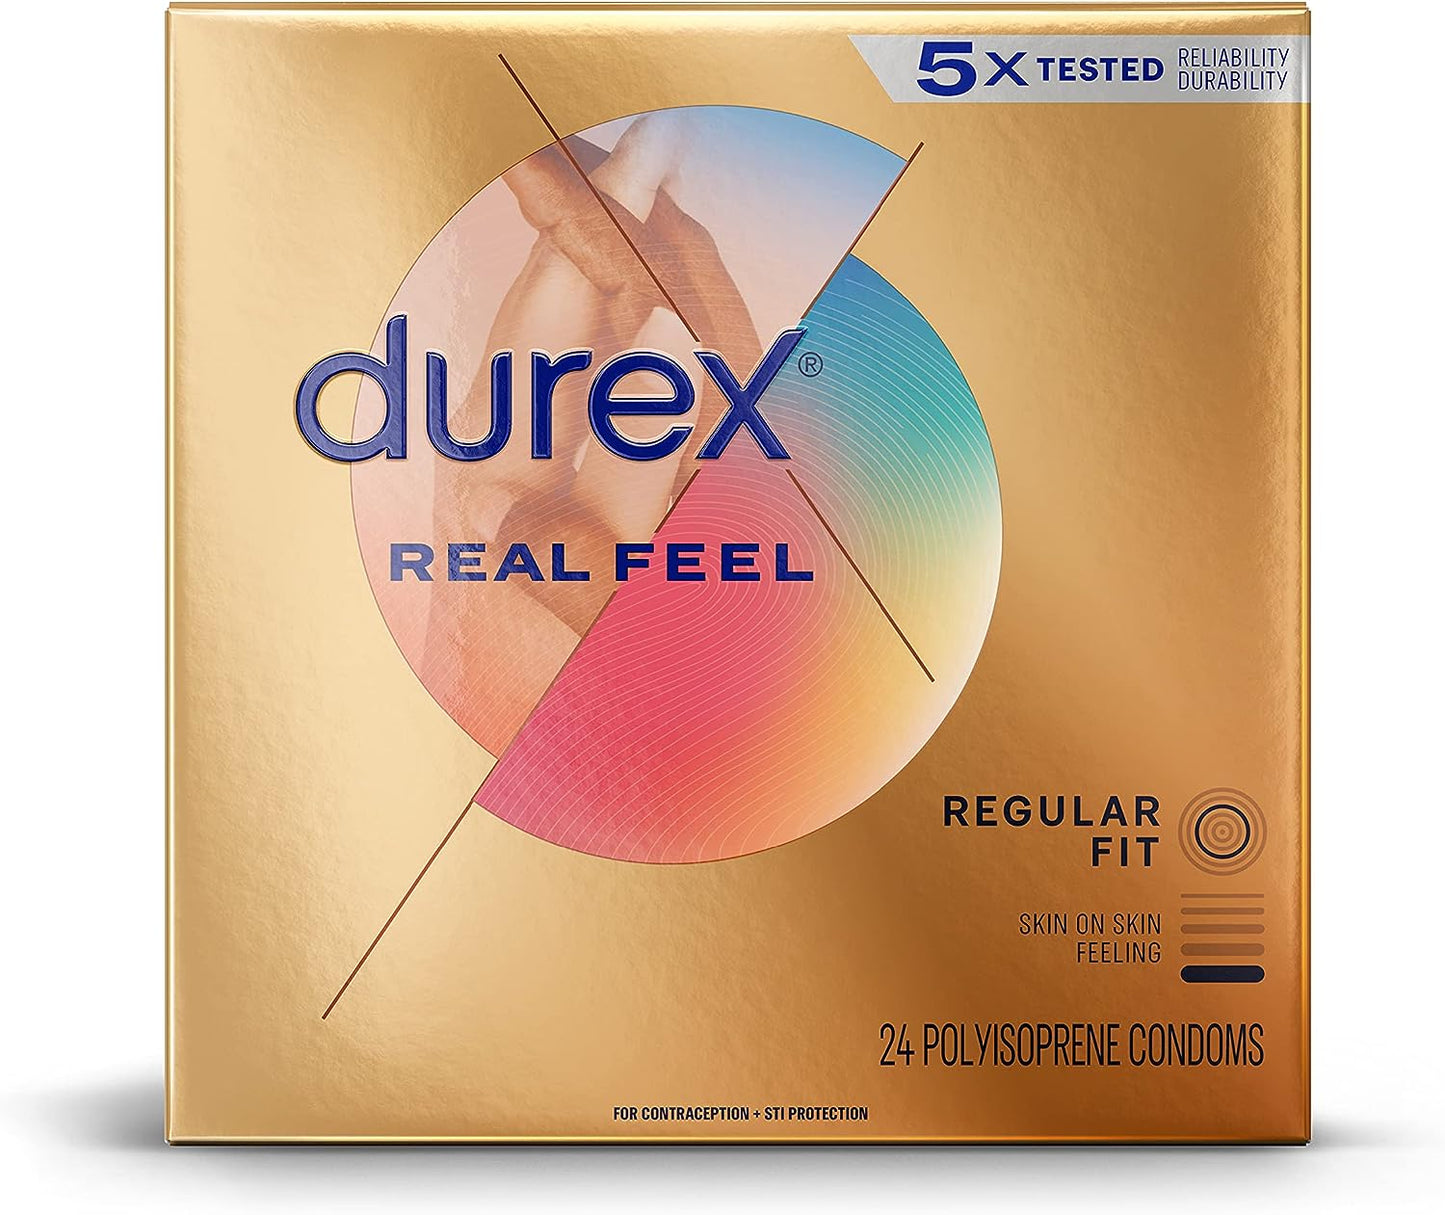 Durex - Condoms for Sex, Non Latex Durex Avanti Bare Real Feel Lubricated Condoms, 24 Count, Non Latex Condoms for Men with Natural Skin on Skin Feeling, FSA & HSA Eligible